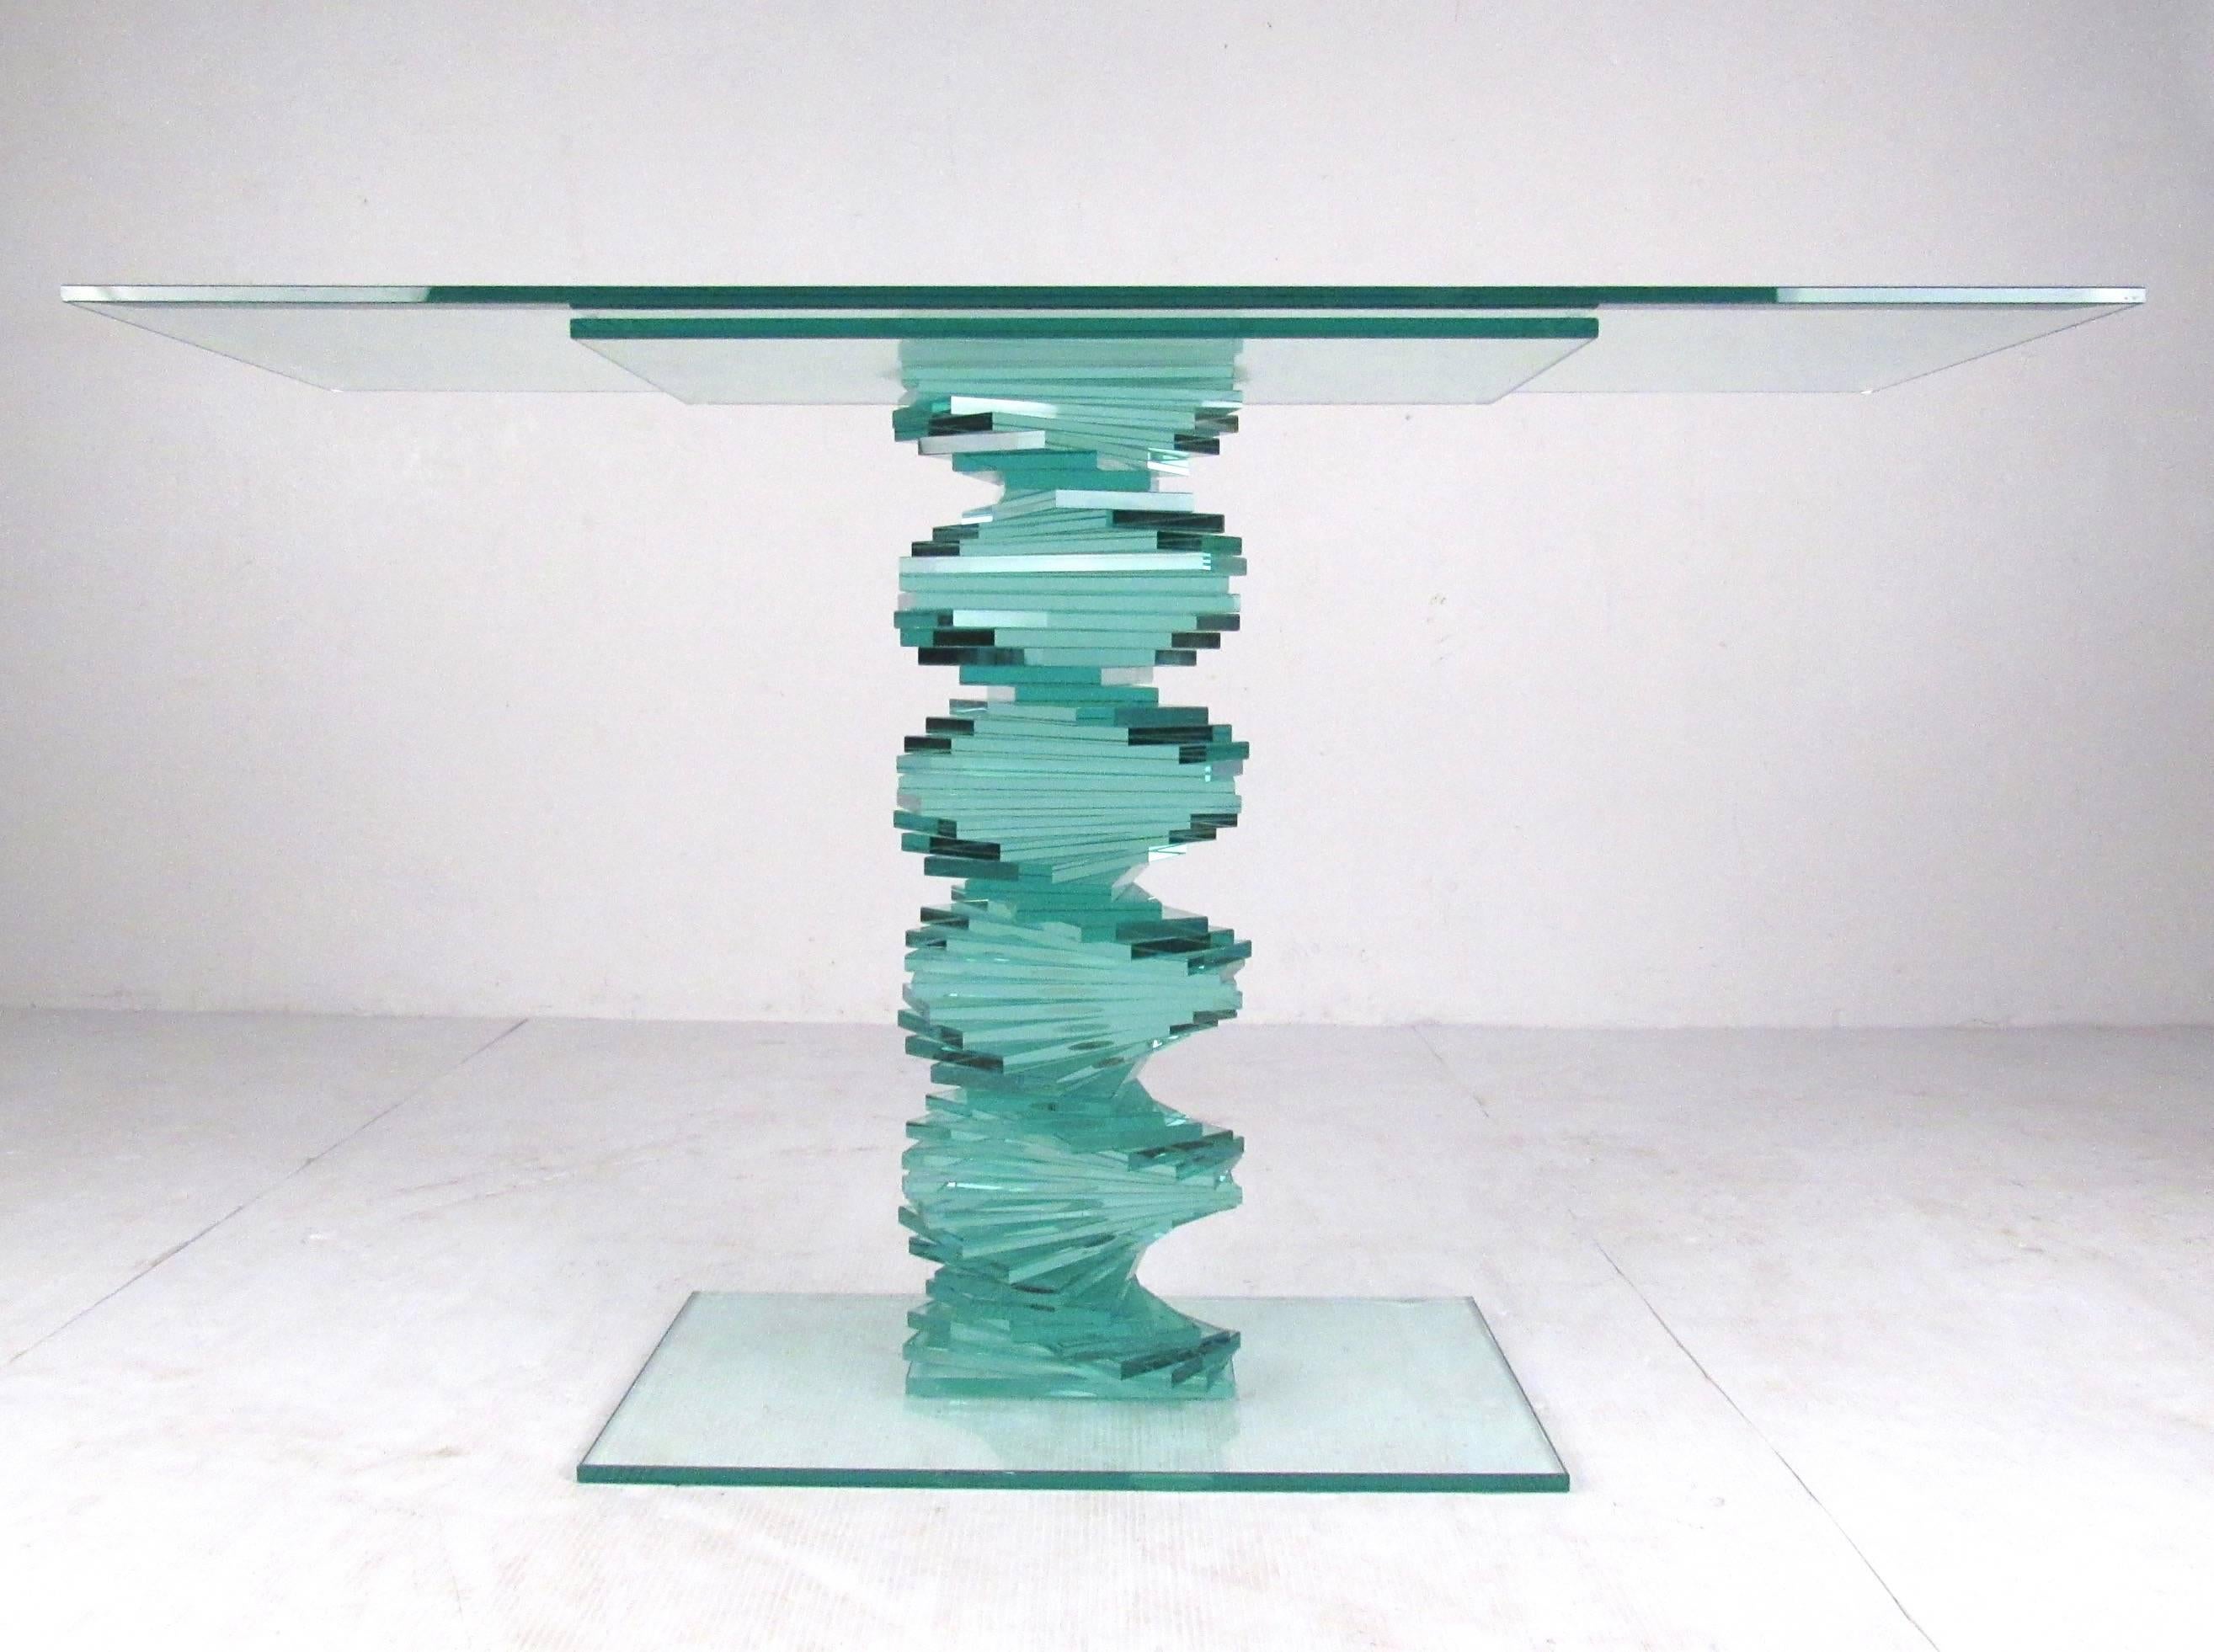 This stacked spiral glass console table features exquisite sculptural modern design. A striking glass console table for entryway, hall display, or office display. Beveled glass top adds to the decorator style of this simple yet stylish contemporary